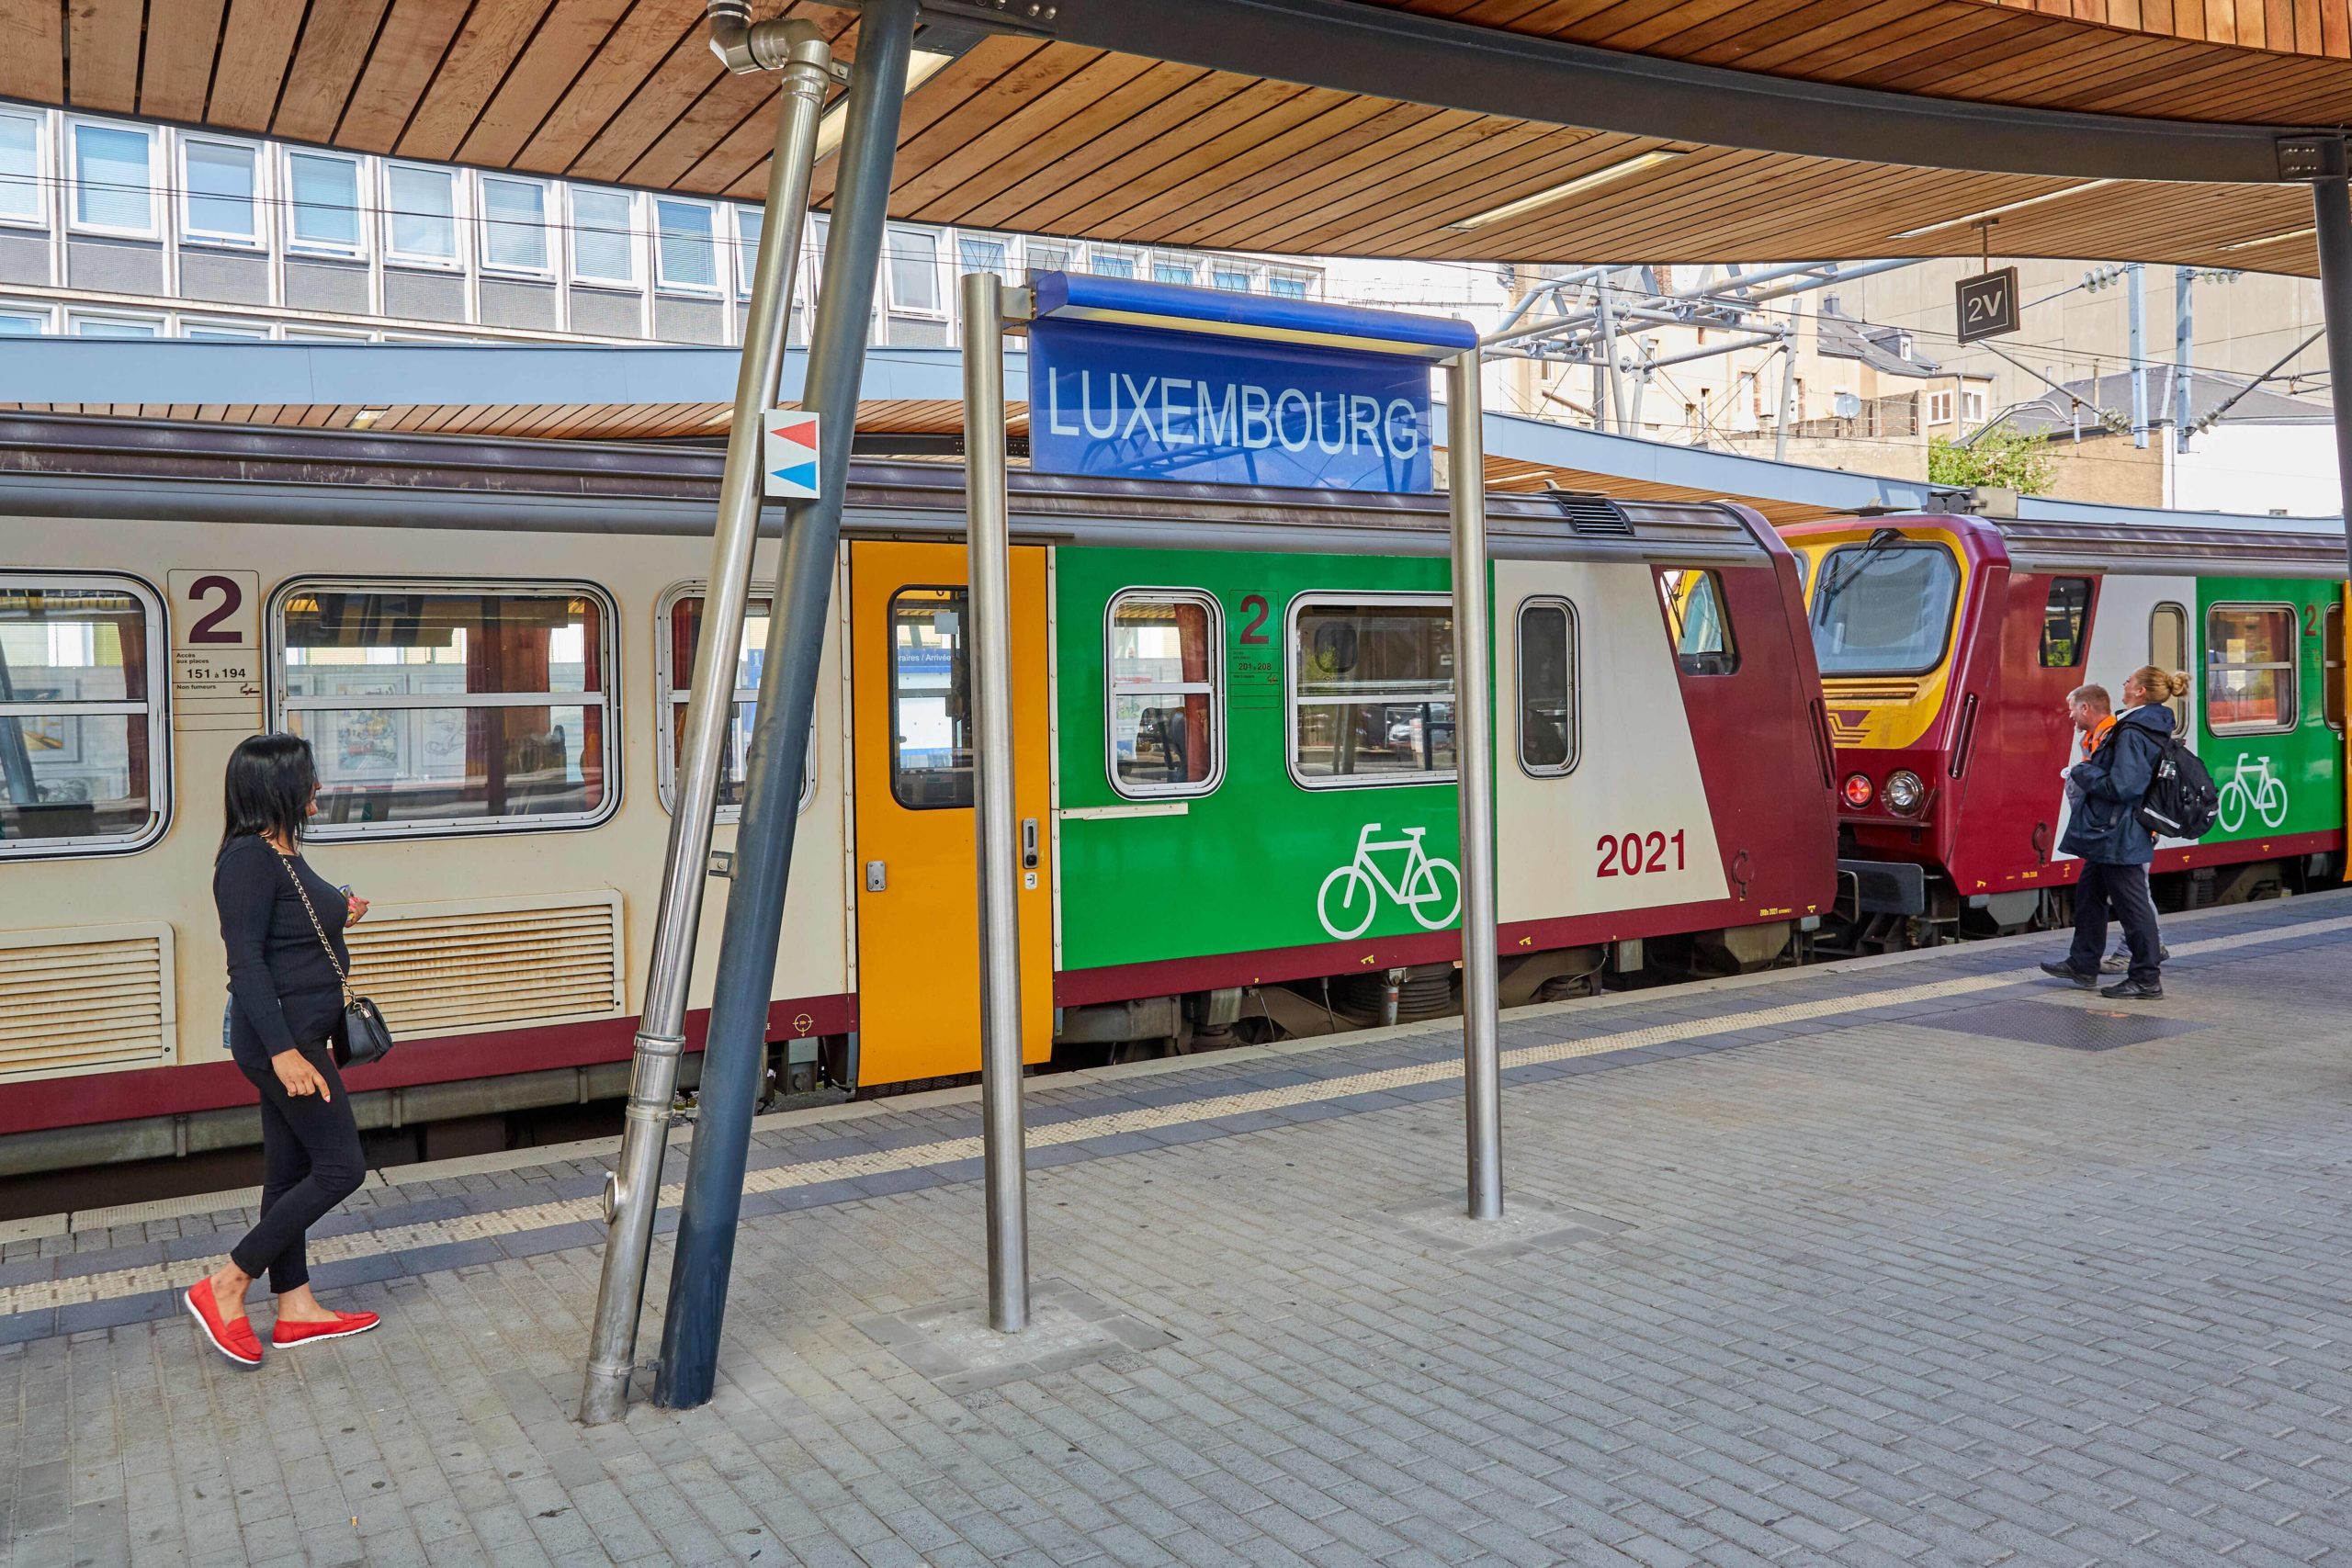 March 1st: Grand Duchy of Luxembourg offers free public transport